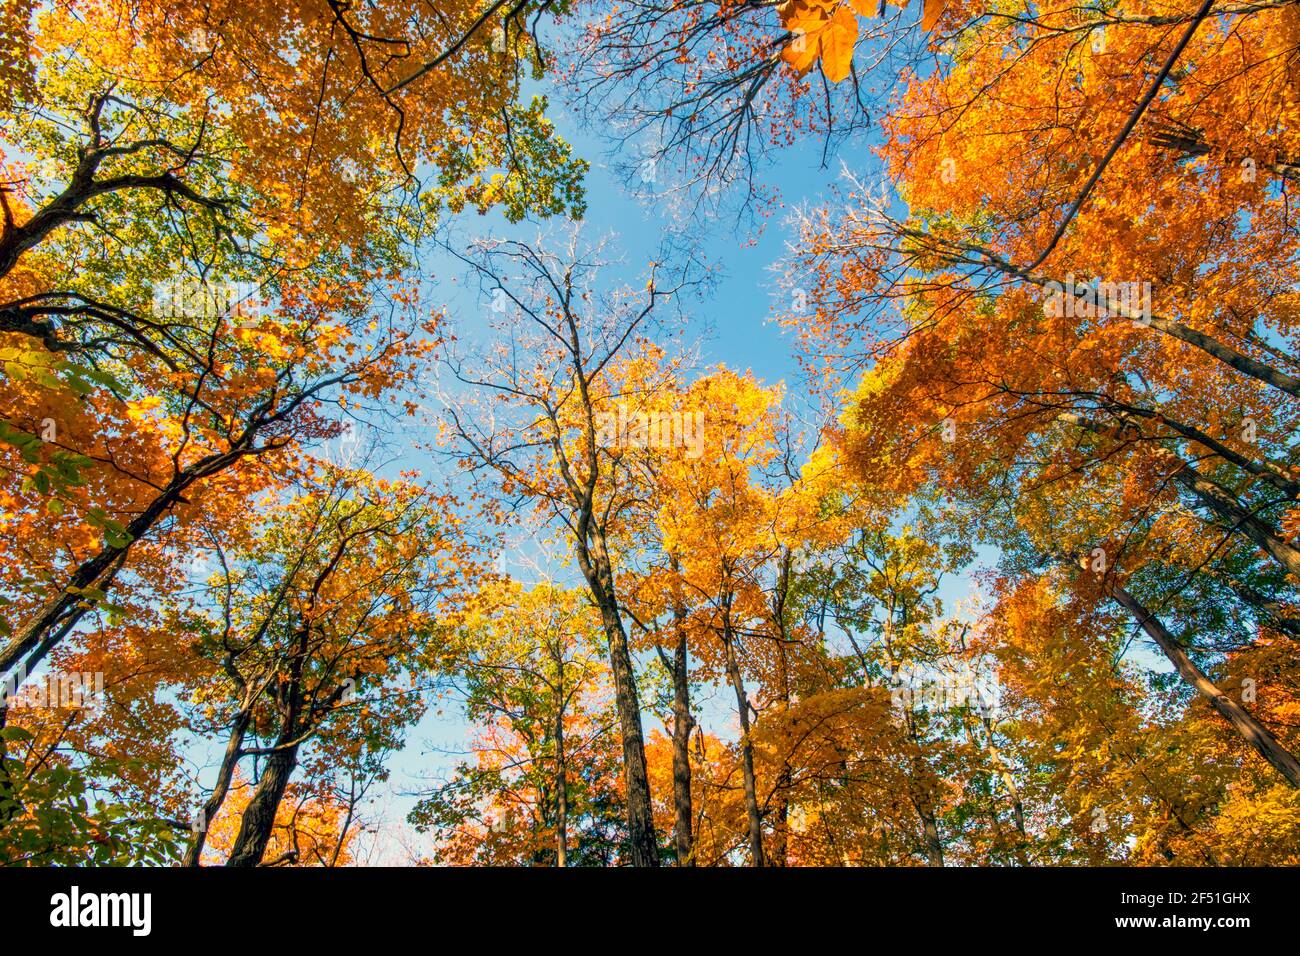 Looking up at a variety of brightly coloured leaves covering the forest in Autumn in Canada Stock Photo